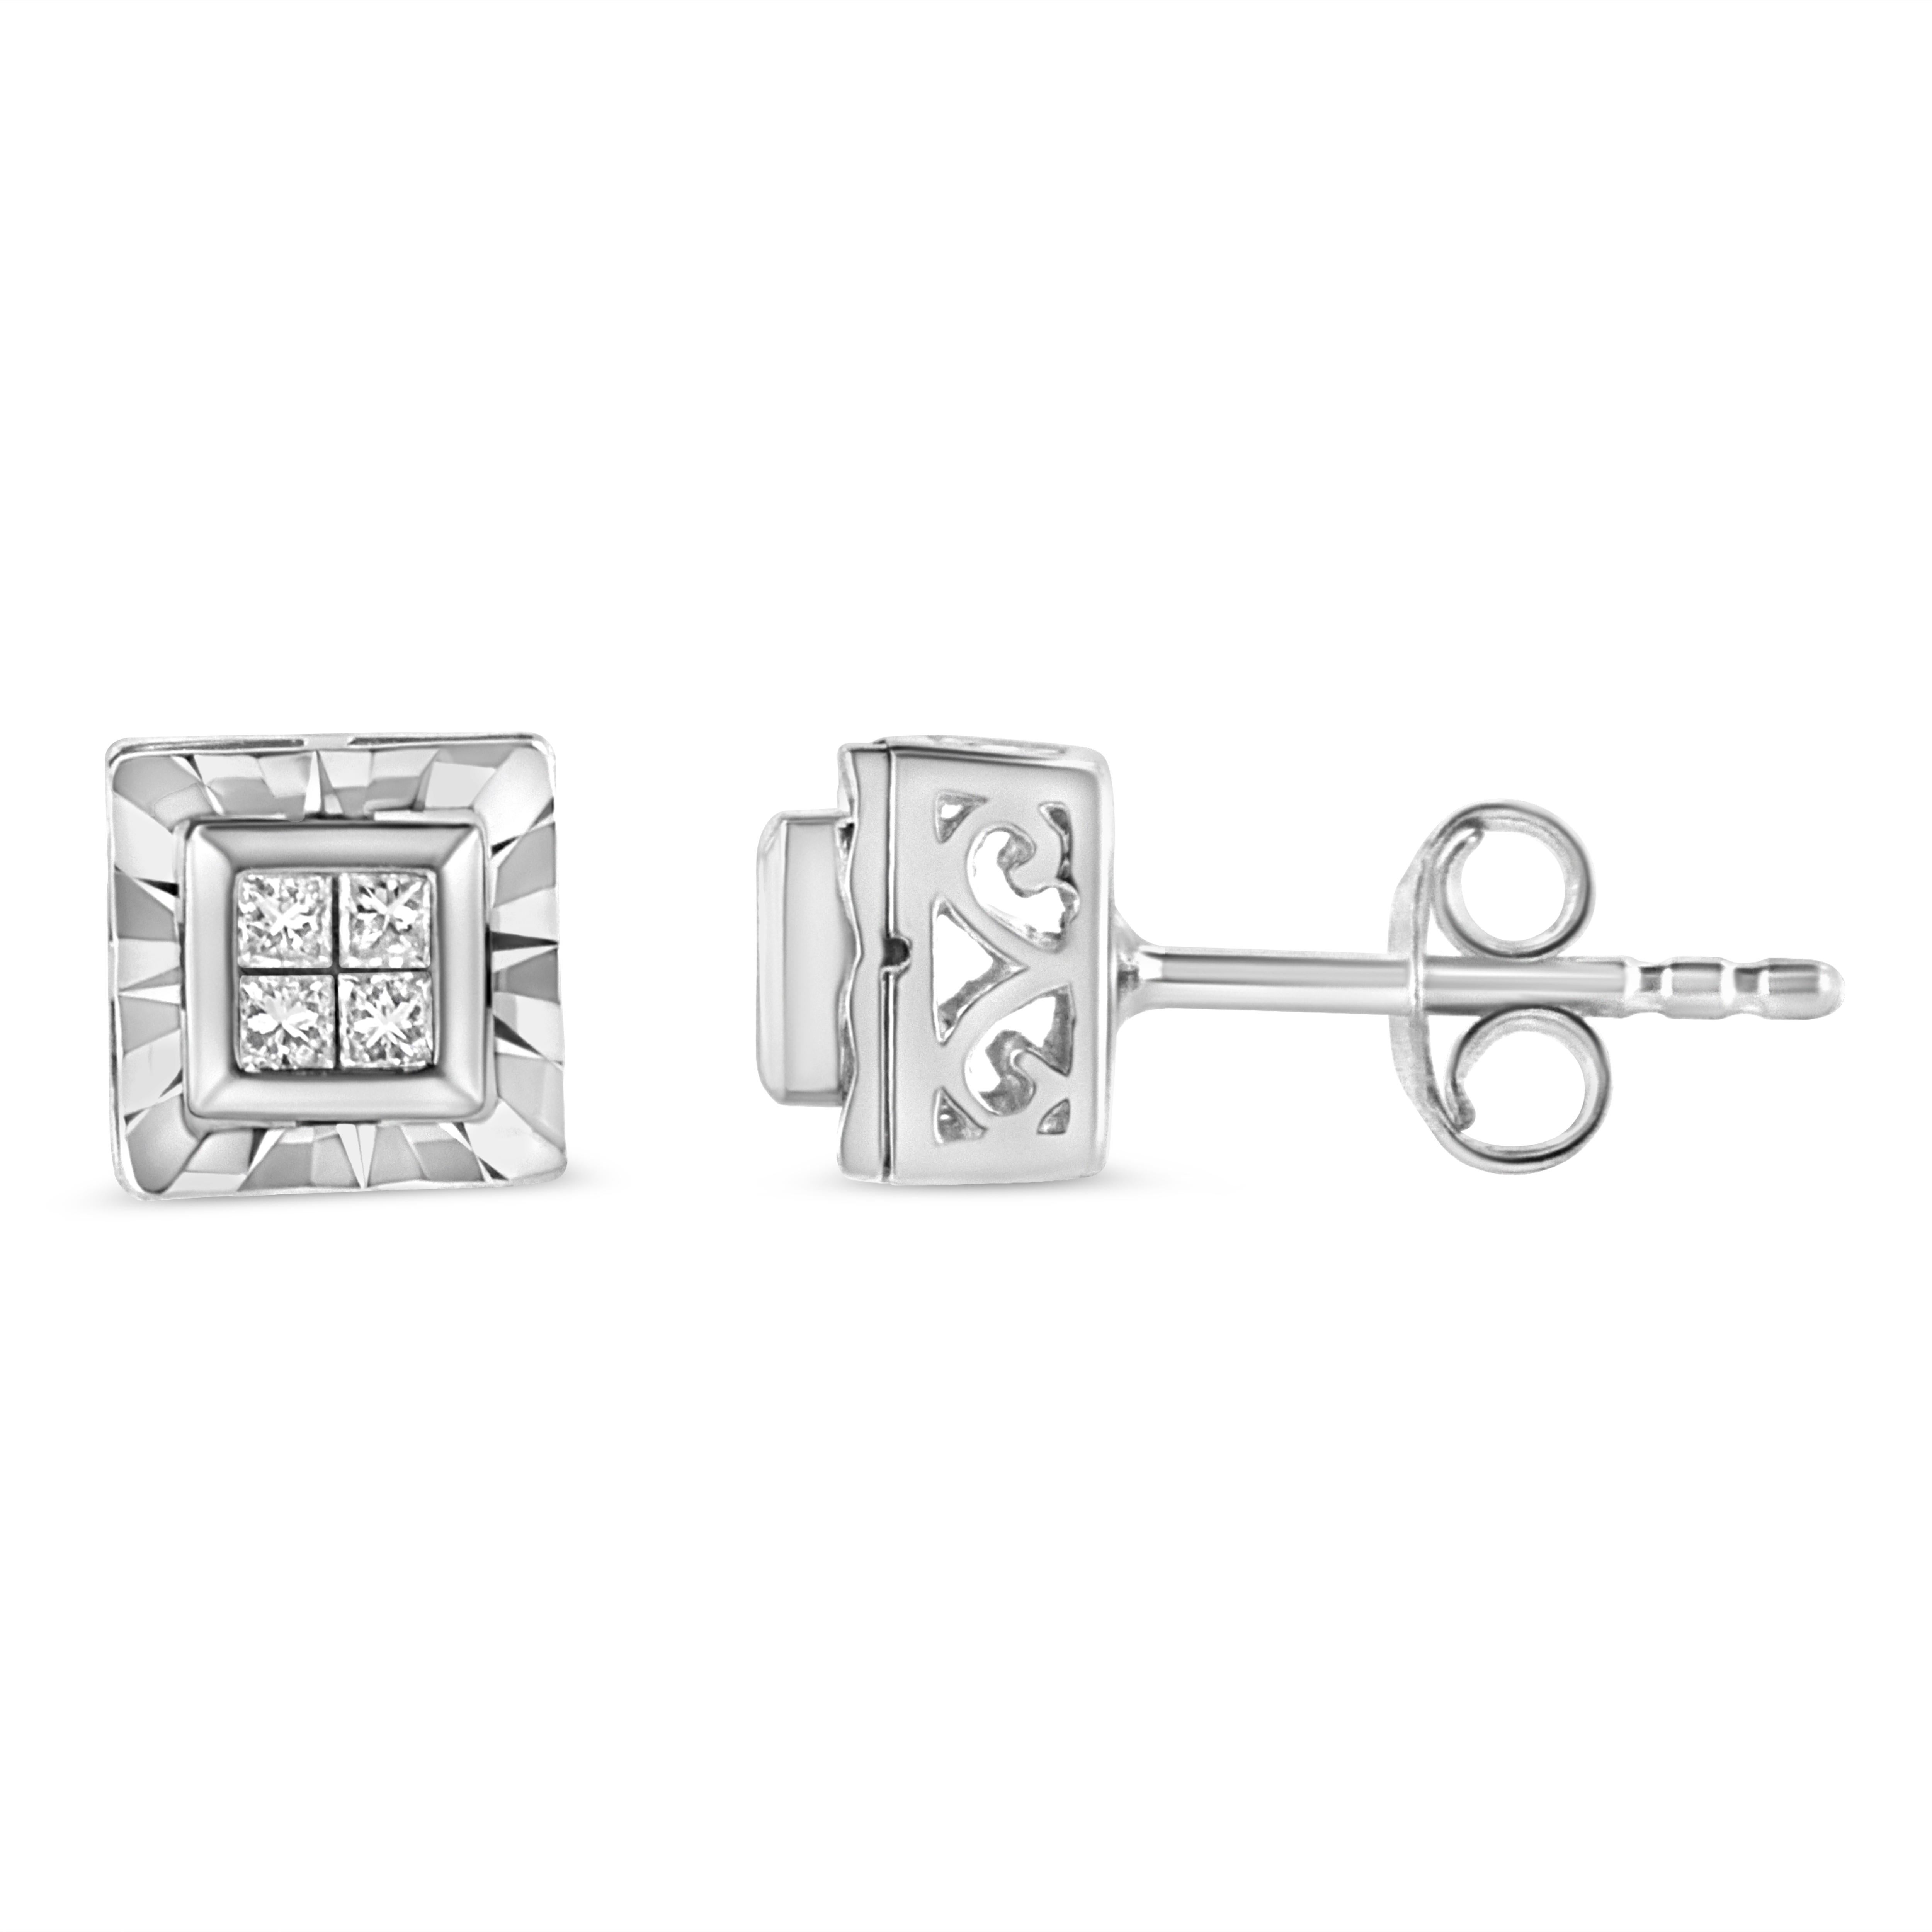 You will love these elaborately designed stud earrings set in cool .925 sterling silver. The outer square of these composite studs display a textured silver look, followed by a band of silver outlining four princess-cut diamonds at the center. These